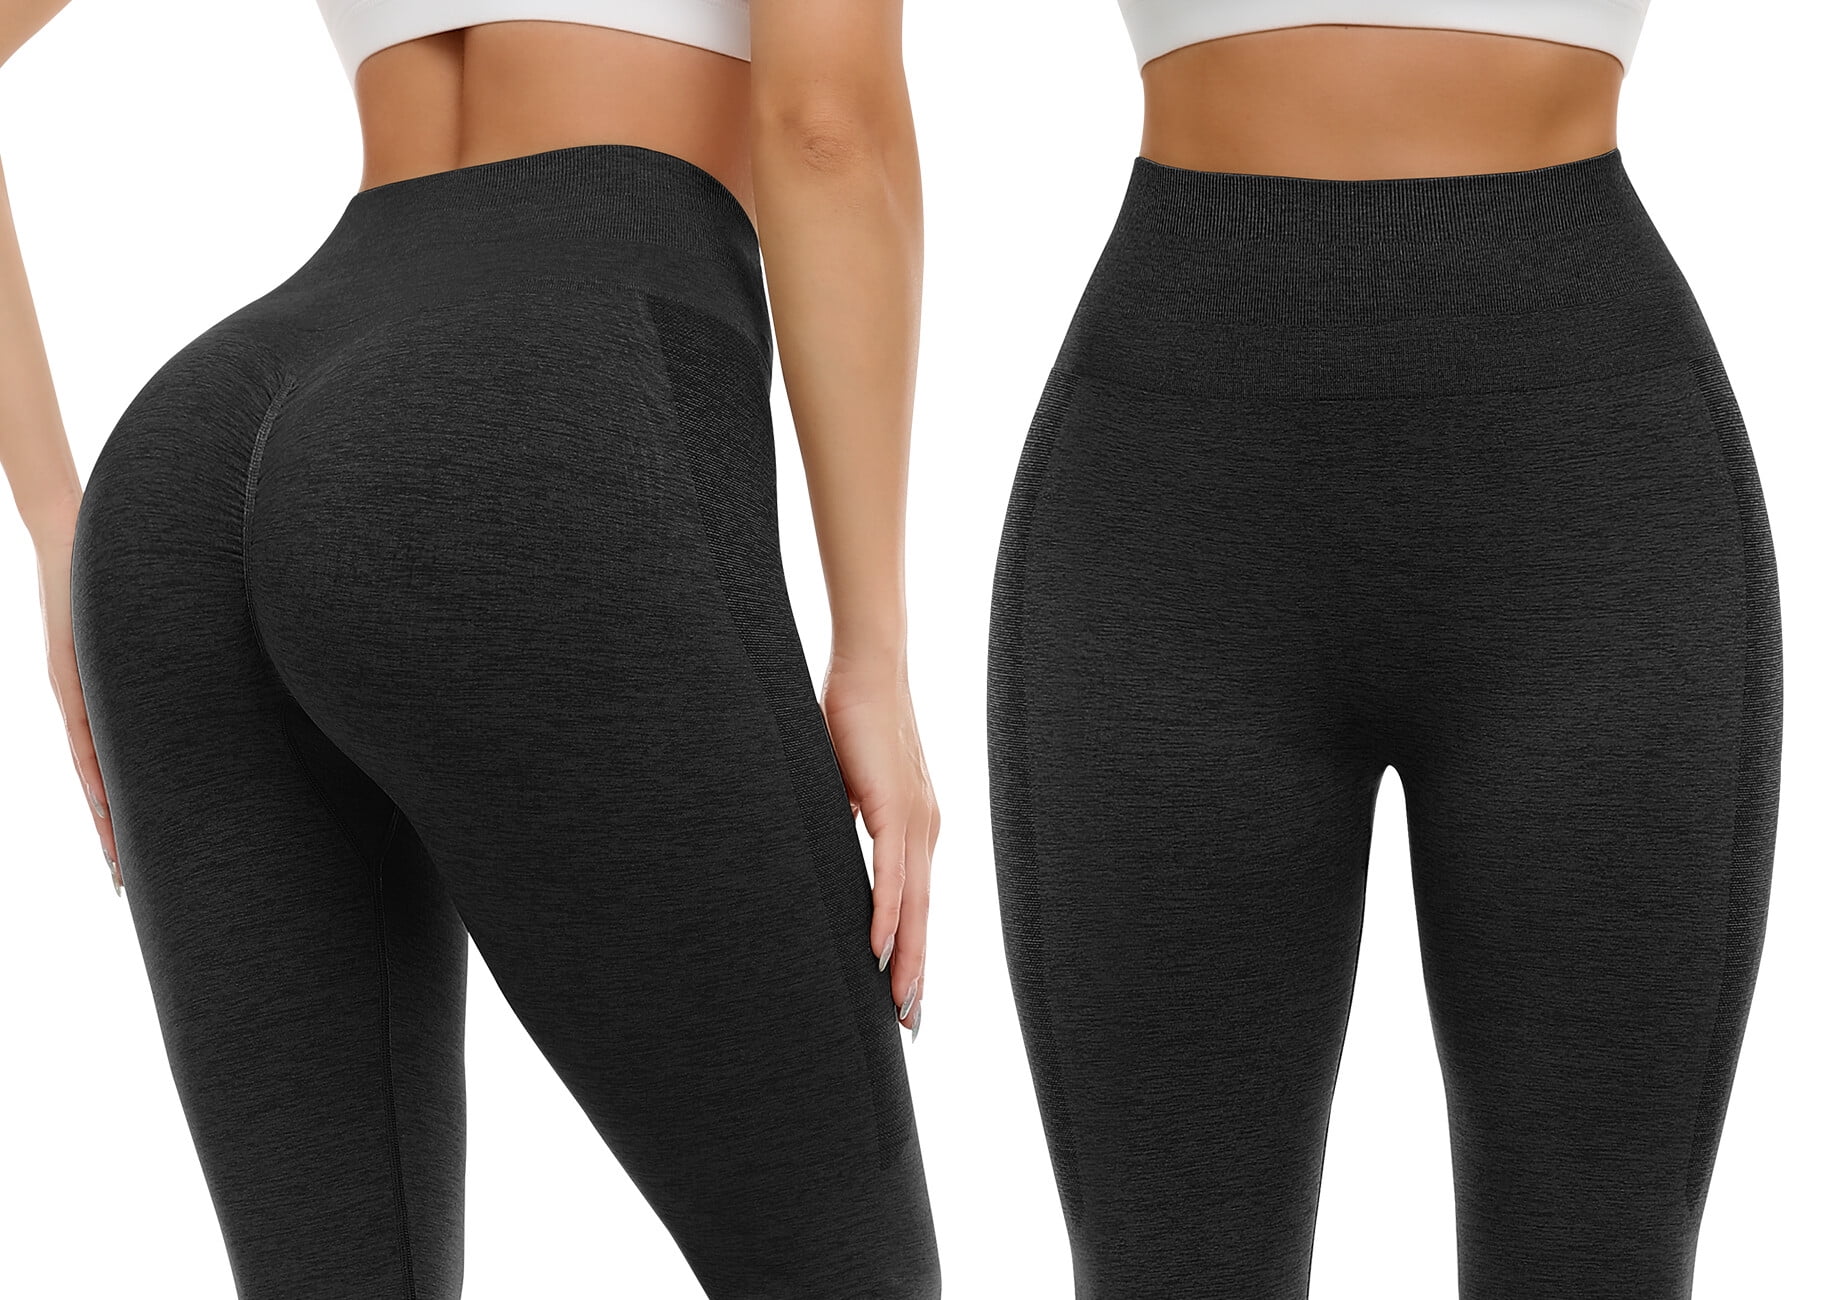 A AGROSTE Seamless Leggings for Women Booty High Waisted Workout Yoga Pants  Amplify Ruched Tights DarkGrey-XL 